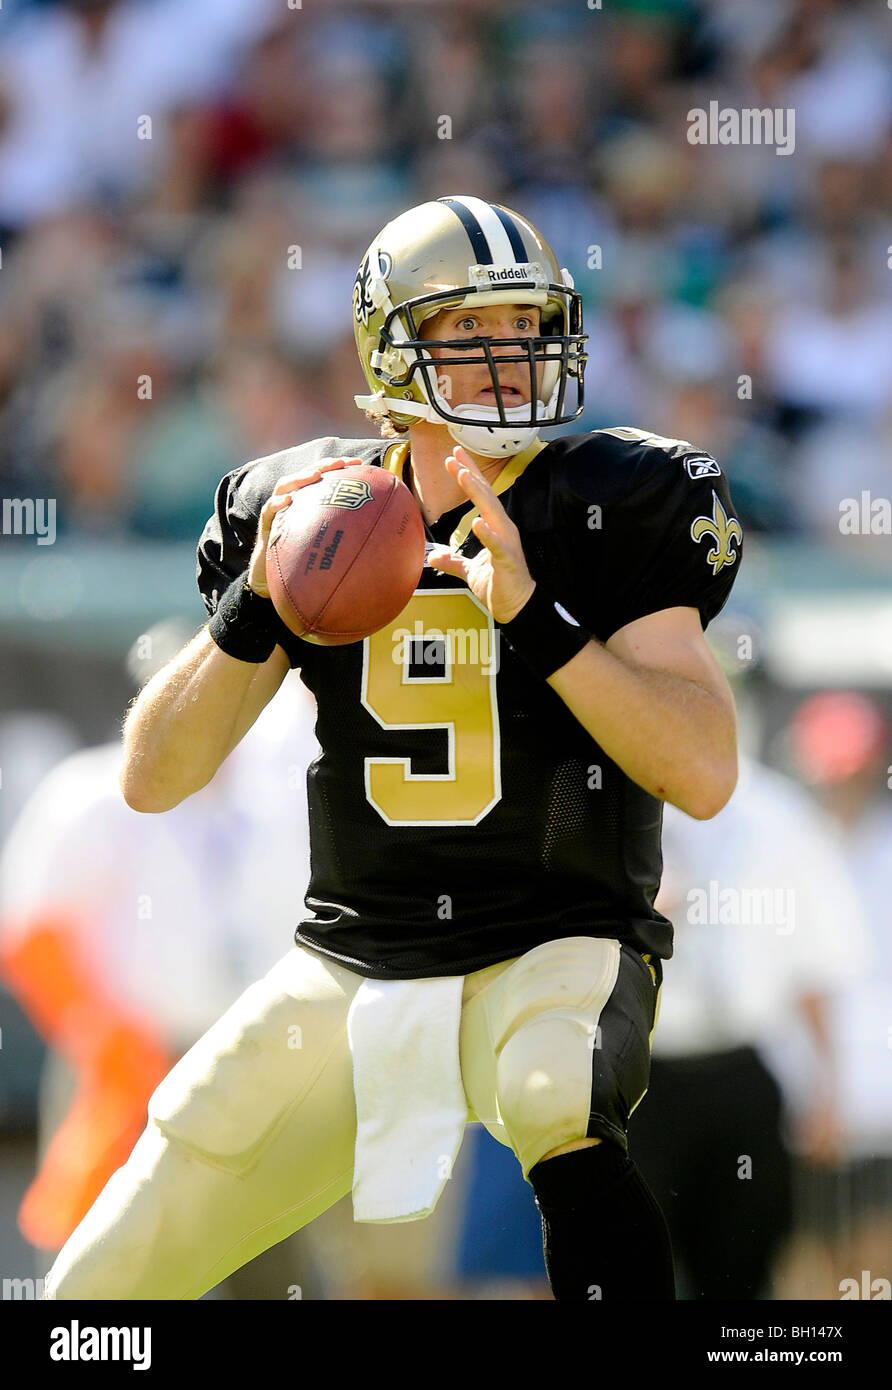 Drew Brees #9 of the New Orleans Saints Stock Photo